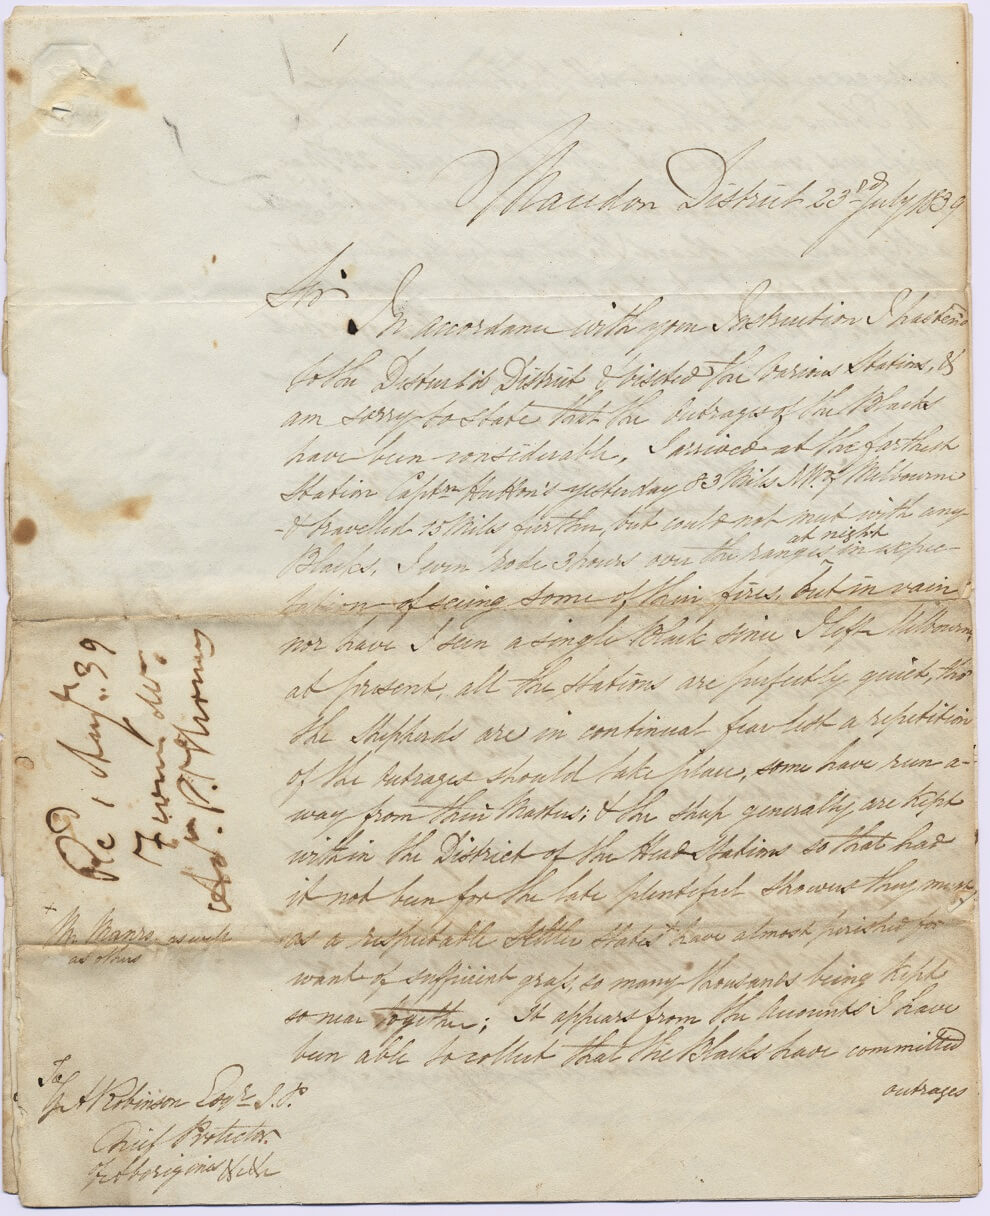 old handwritten document. appears to be a letter.